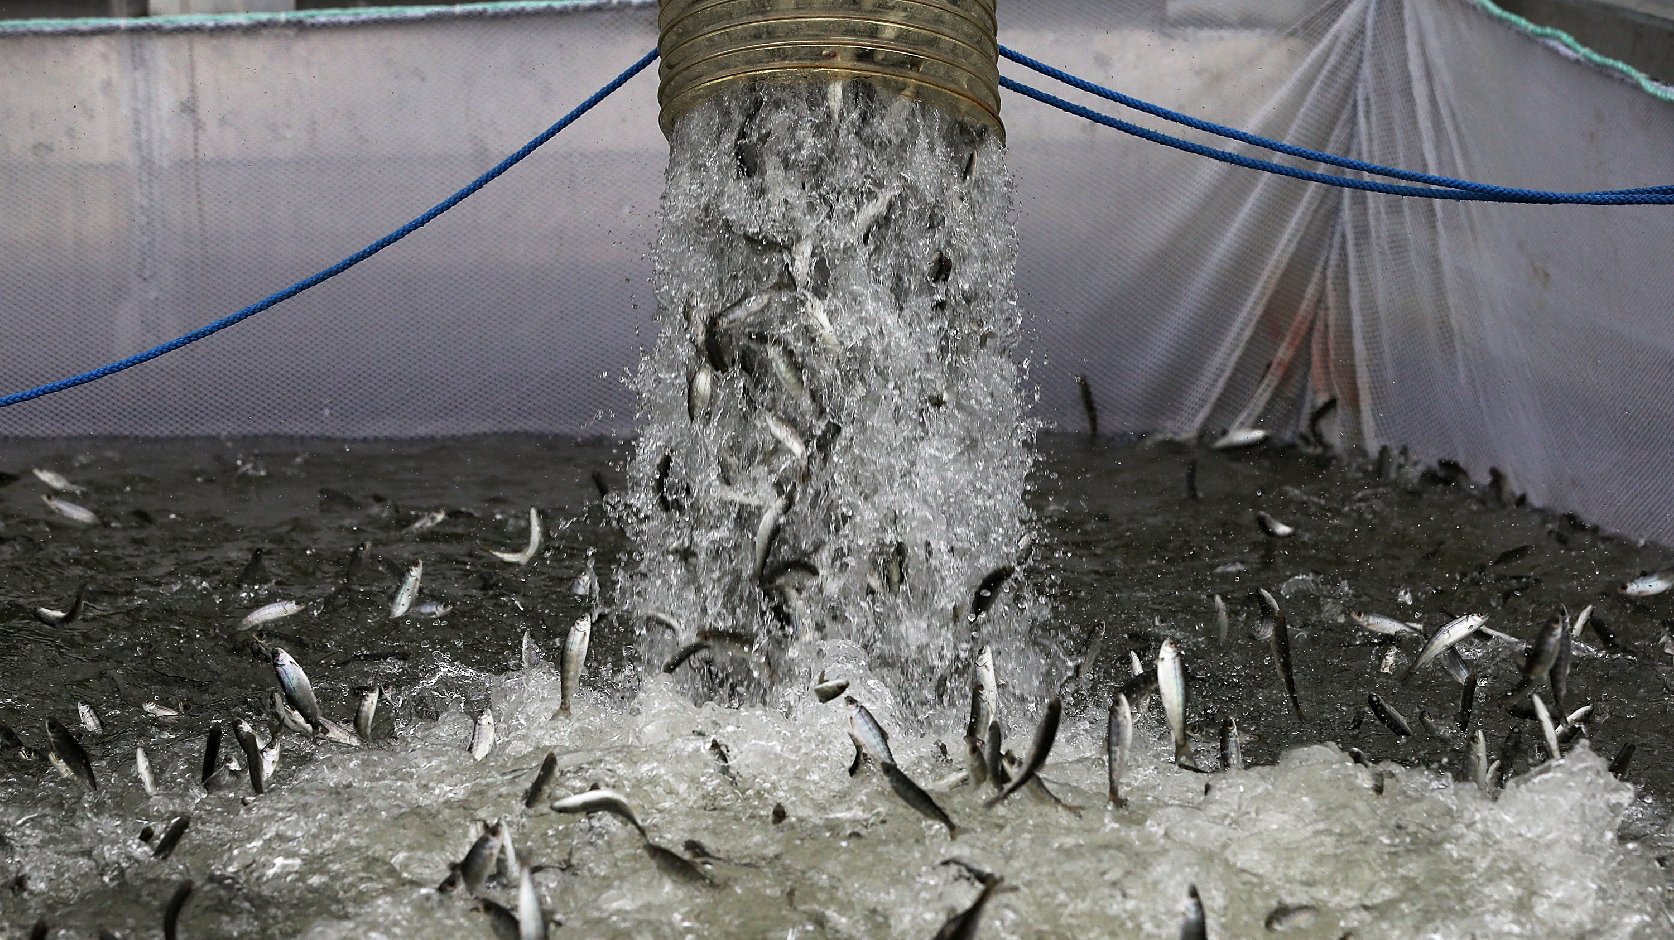 Pacific Or Bust: Fingerling Chinook salmon are dumped into a holding pen Tuesday as they are transferred from a truck into the Sacramento River in Rio Vista, Calif. From here, they'll be towed downstream for a bit, then make their own way out to the Pacific Ocean. Photo: Justin Sullivan/Getty Images